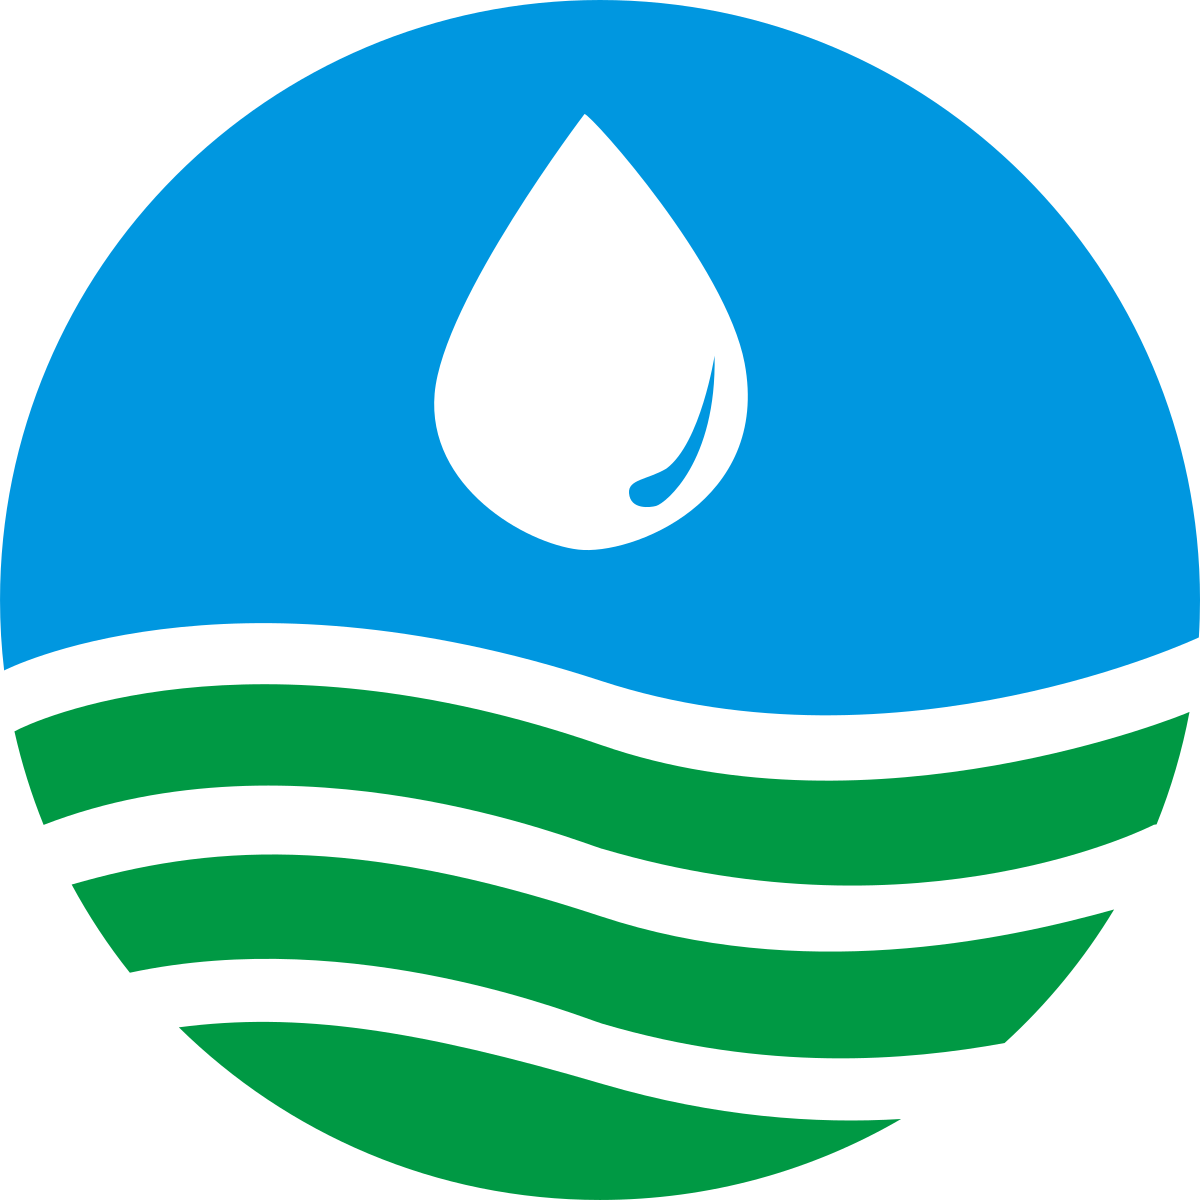 ROC_Water_Resources_Agency_Seal.svg.png picture